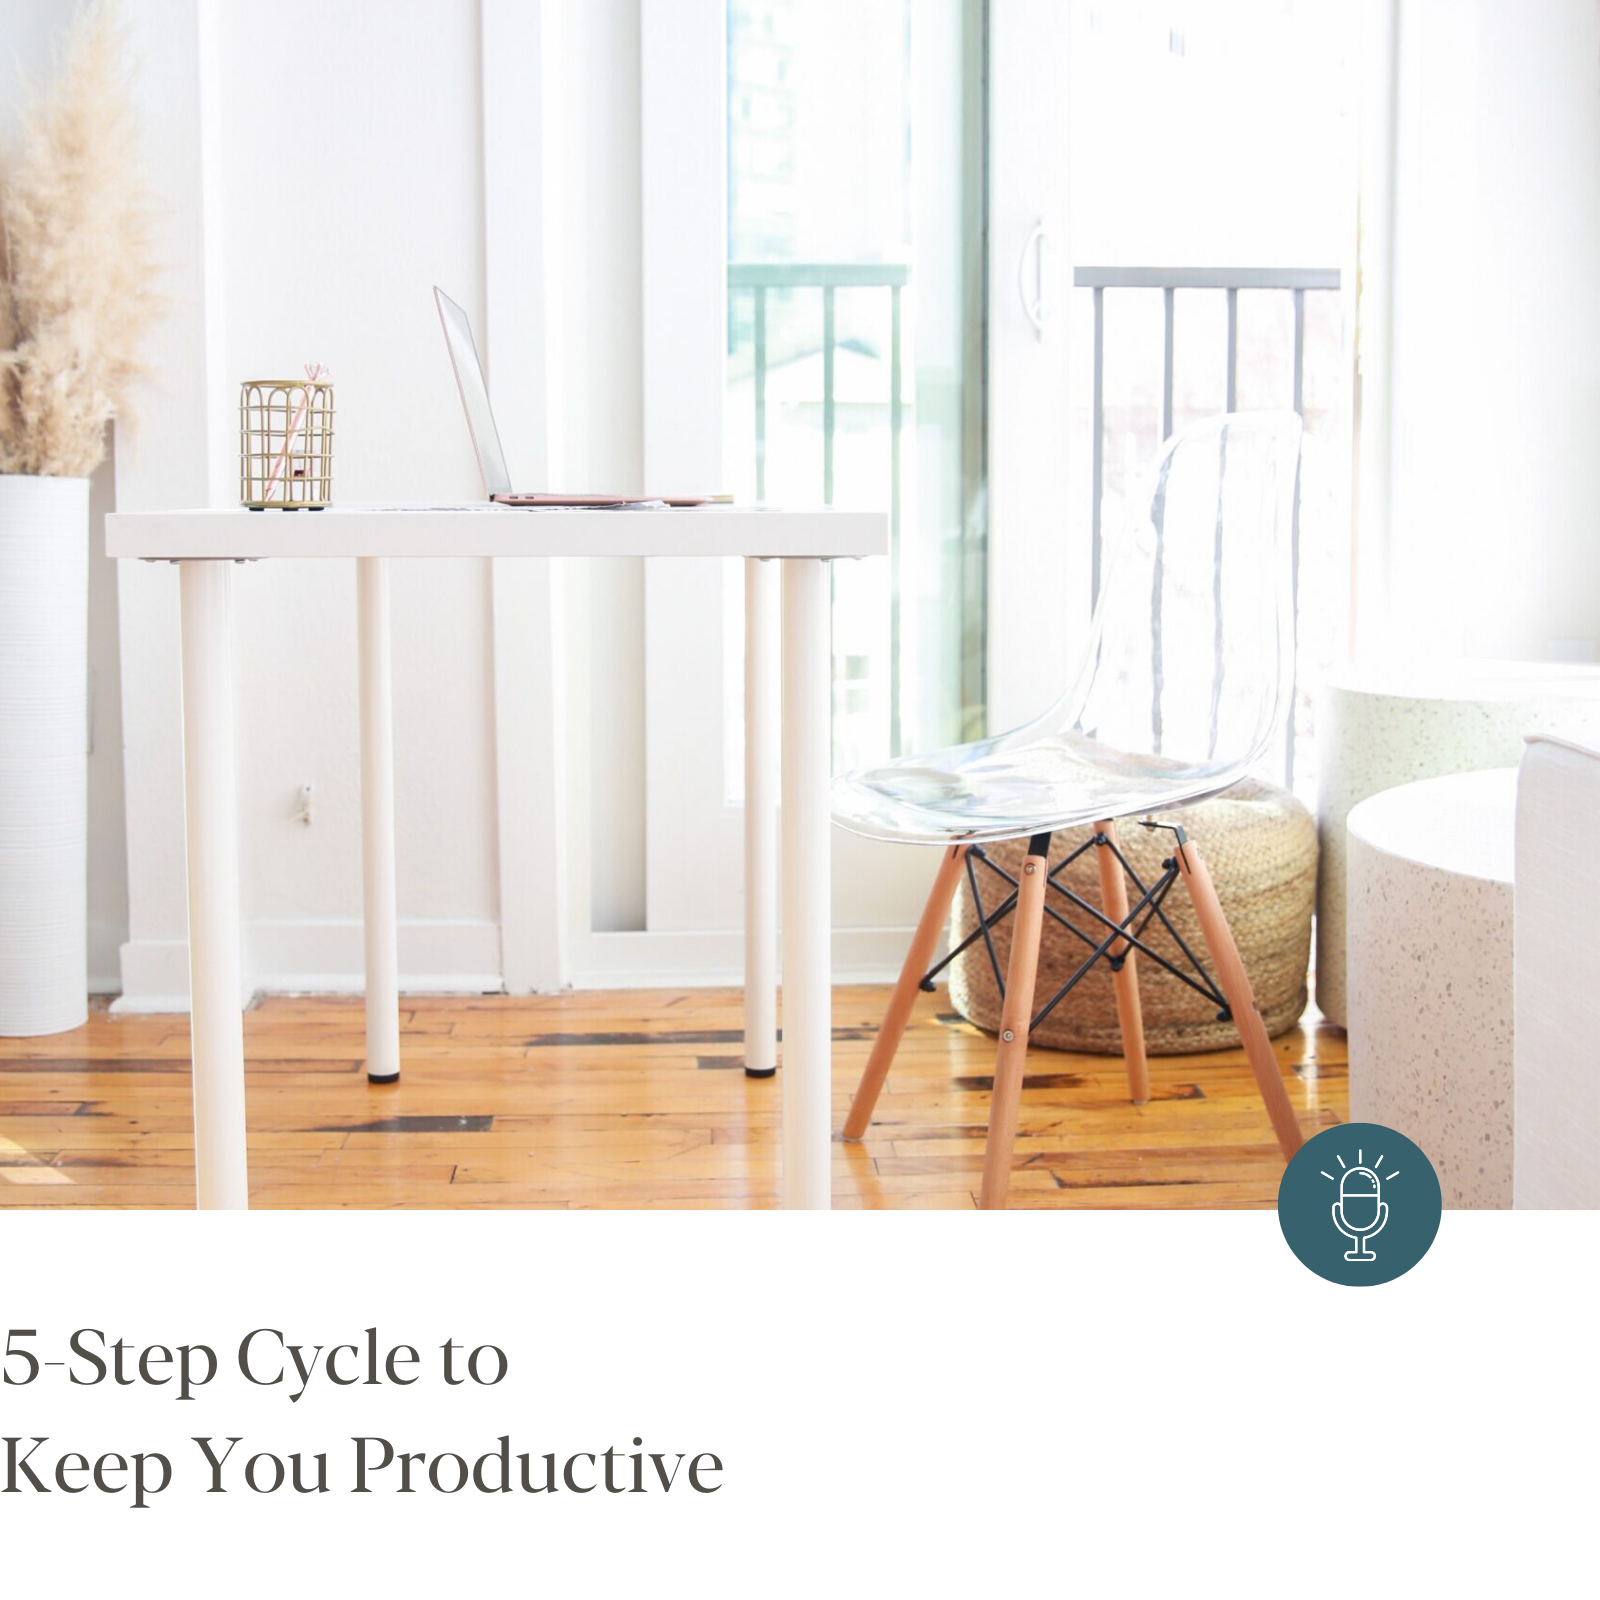 Episode #239 - 5-Step Cycle to Keep You Productive